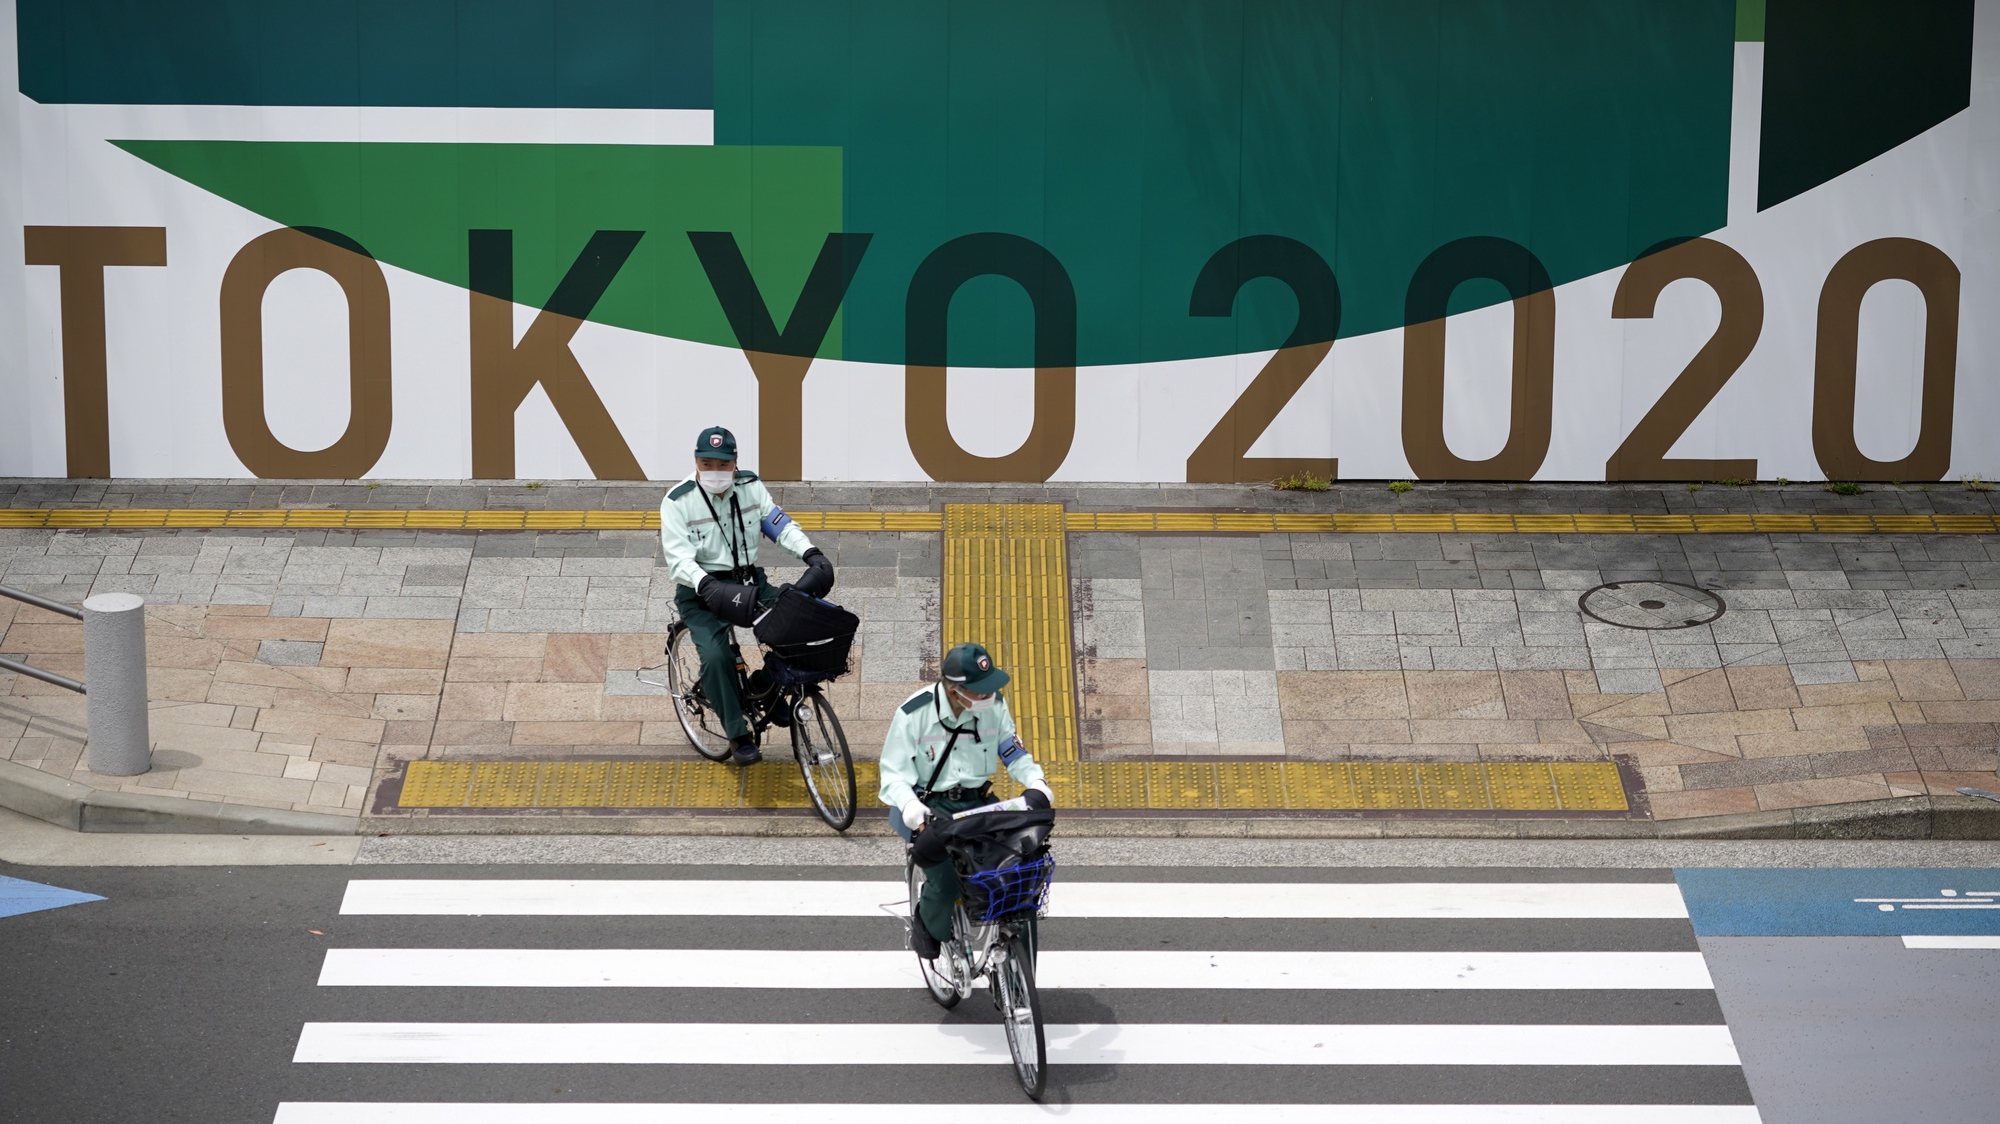 epa09196428 Traffic wardens cycle past a Tokyo Olympics advertising board in Tokyo, Japan, 12 May 2021 (issued 13 May 2021). On 13 May 2021, the National Doctors Union requested the government to cancel the Tokyo Olympics, saying that the response to the coronavirus pandemic should be prioritized.  EPA/FRANCK ROBICHON